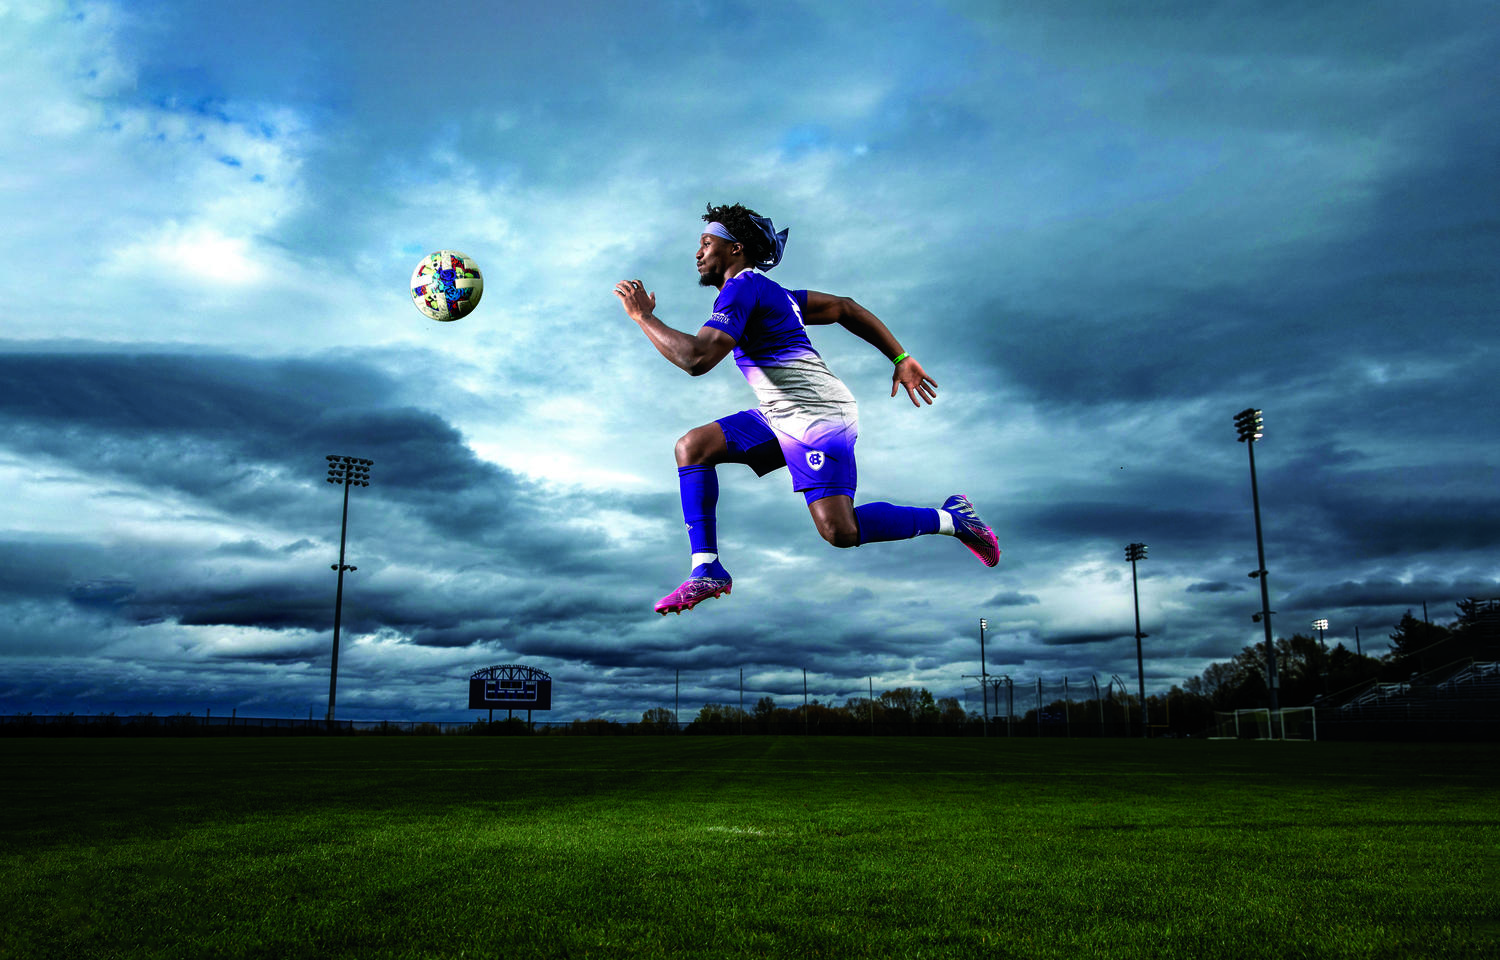 A soccer player in a purple uniform jumping in the air for a soccer ball that is at eye level